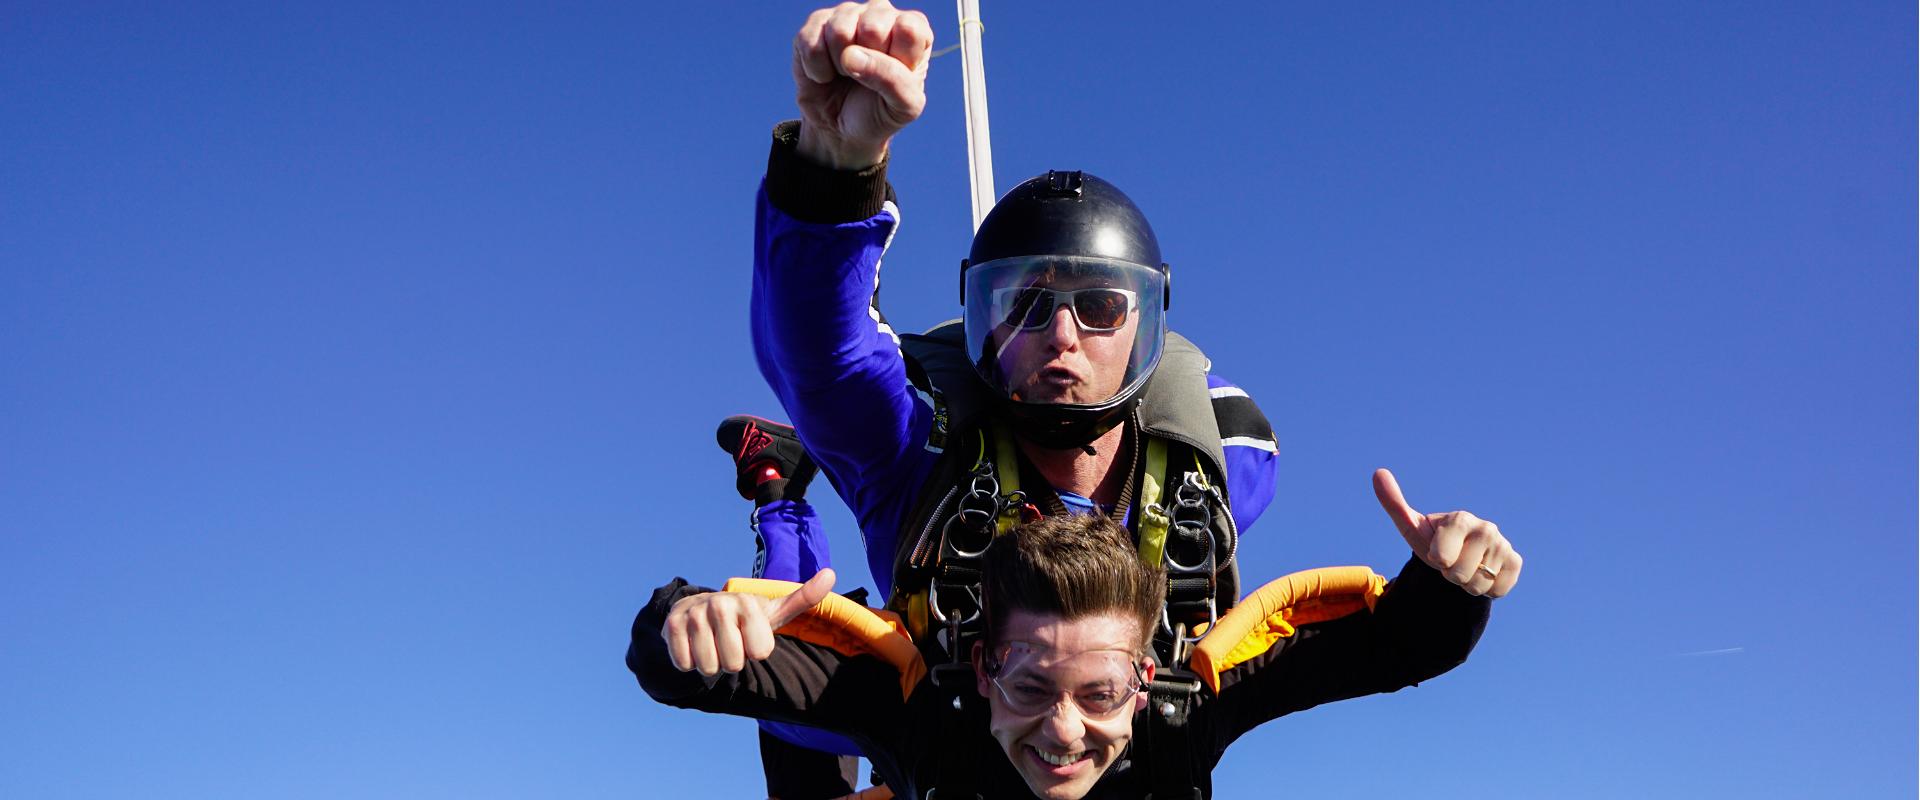 Tandem jump with an experienced instructor at Rapla Airport